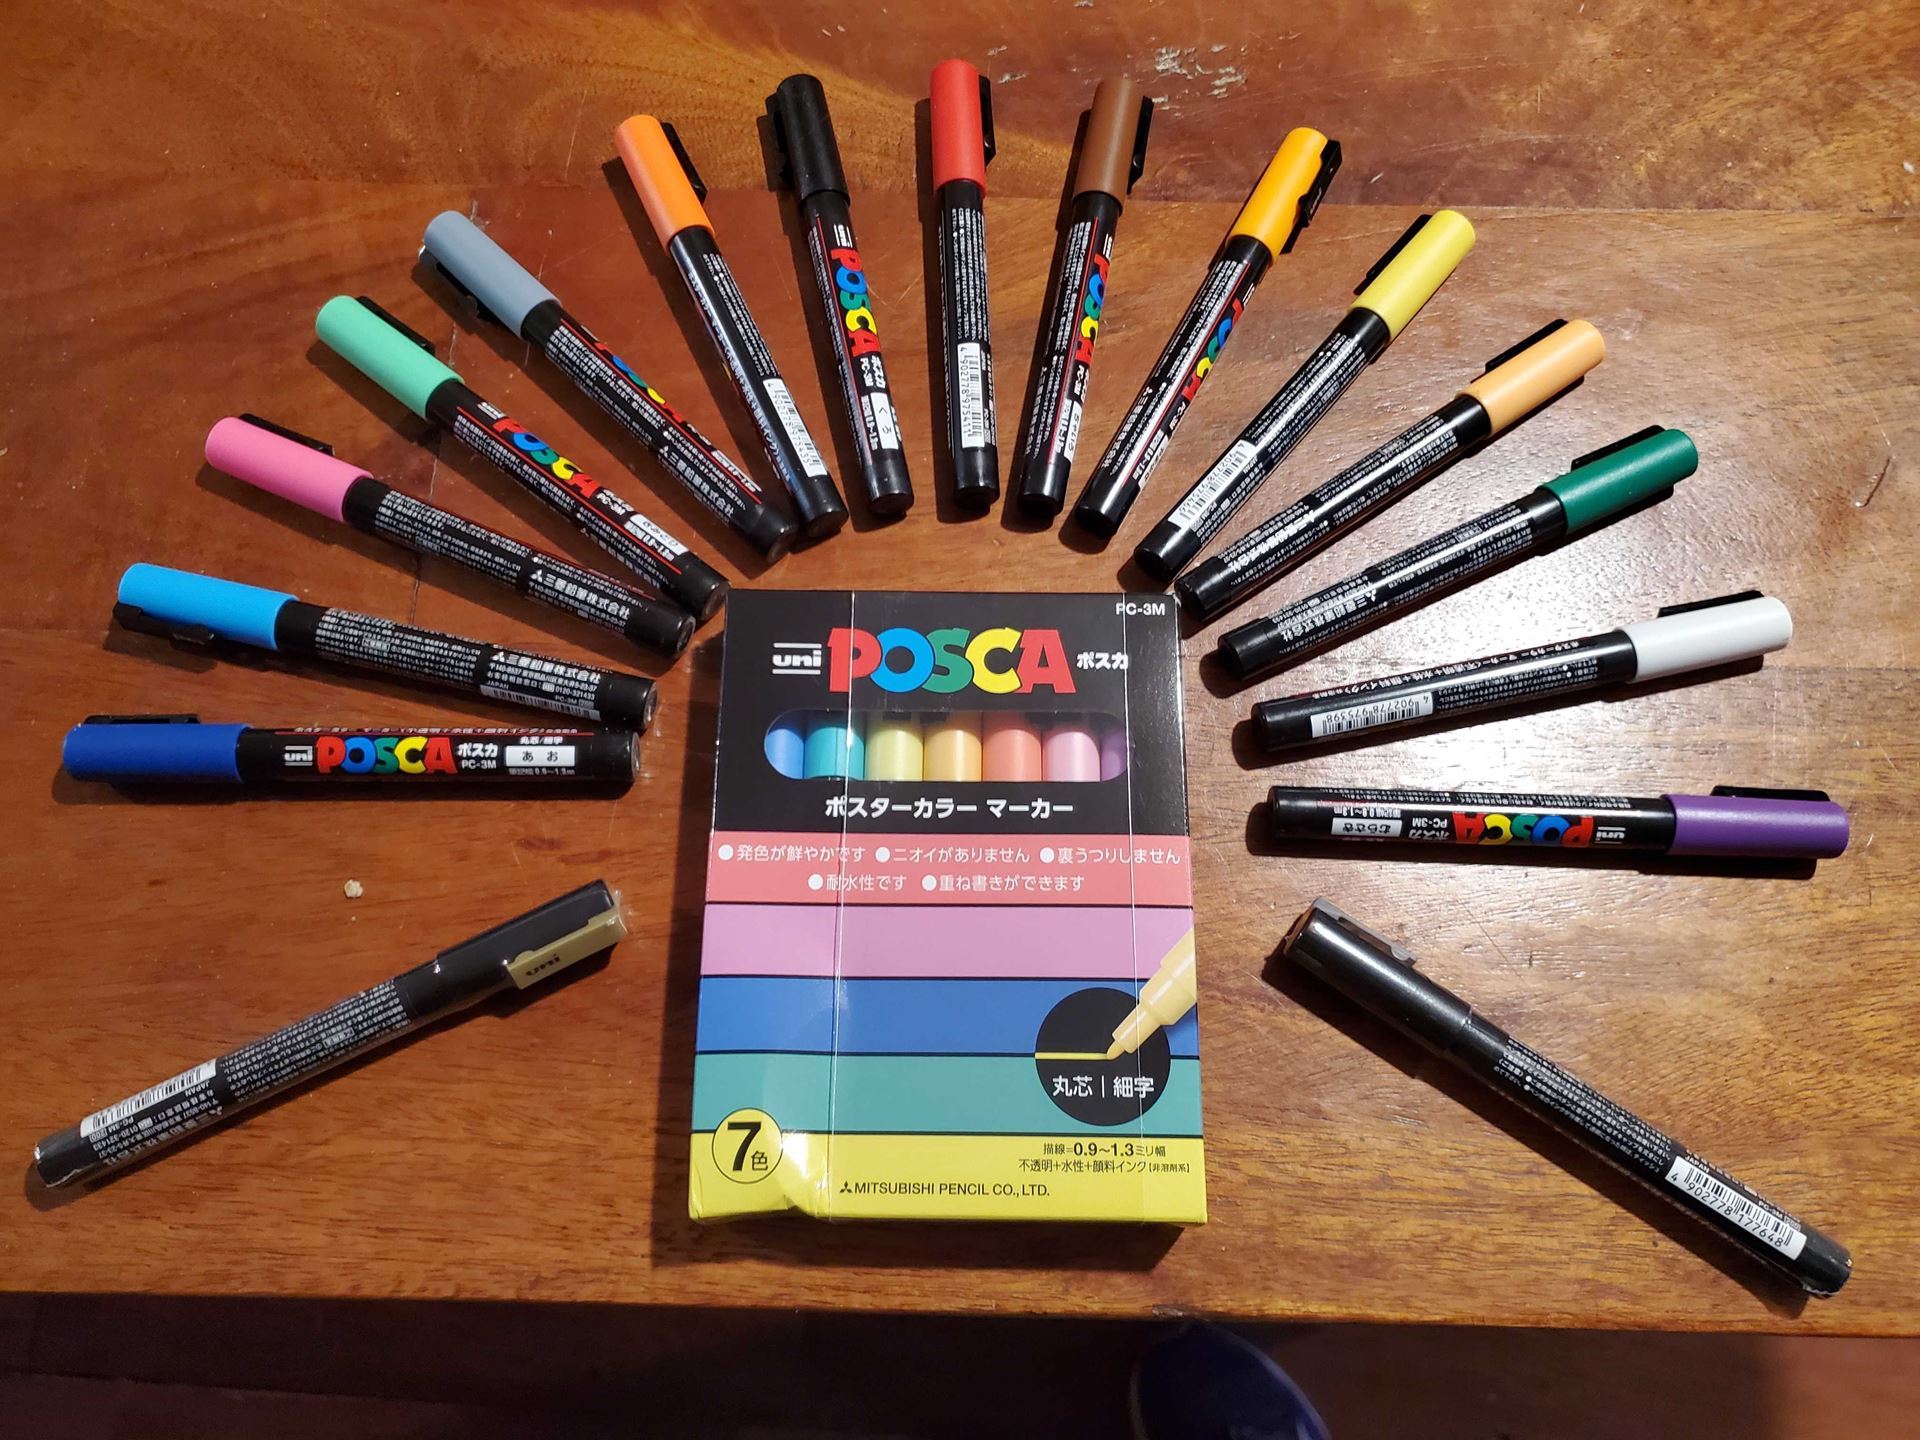 Concord Makerspace - Explore Posca Paint Pen Art! FREE class with